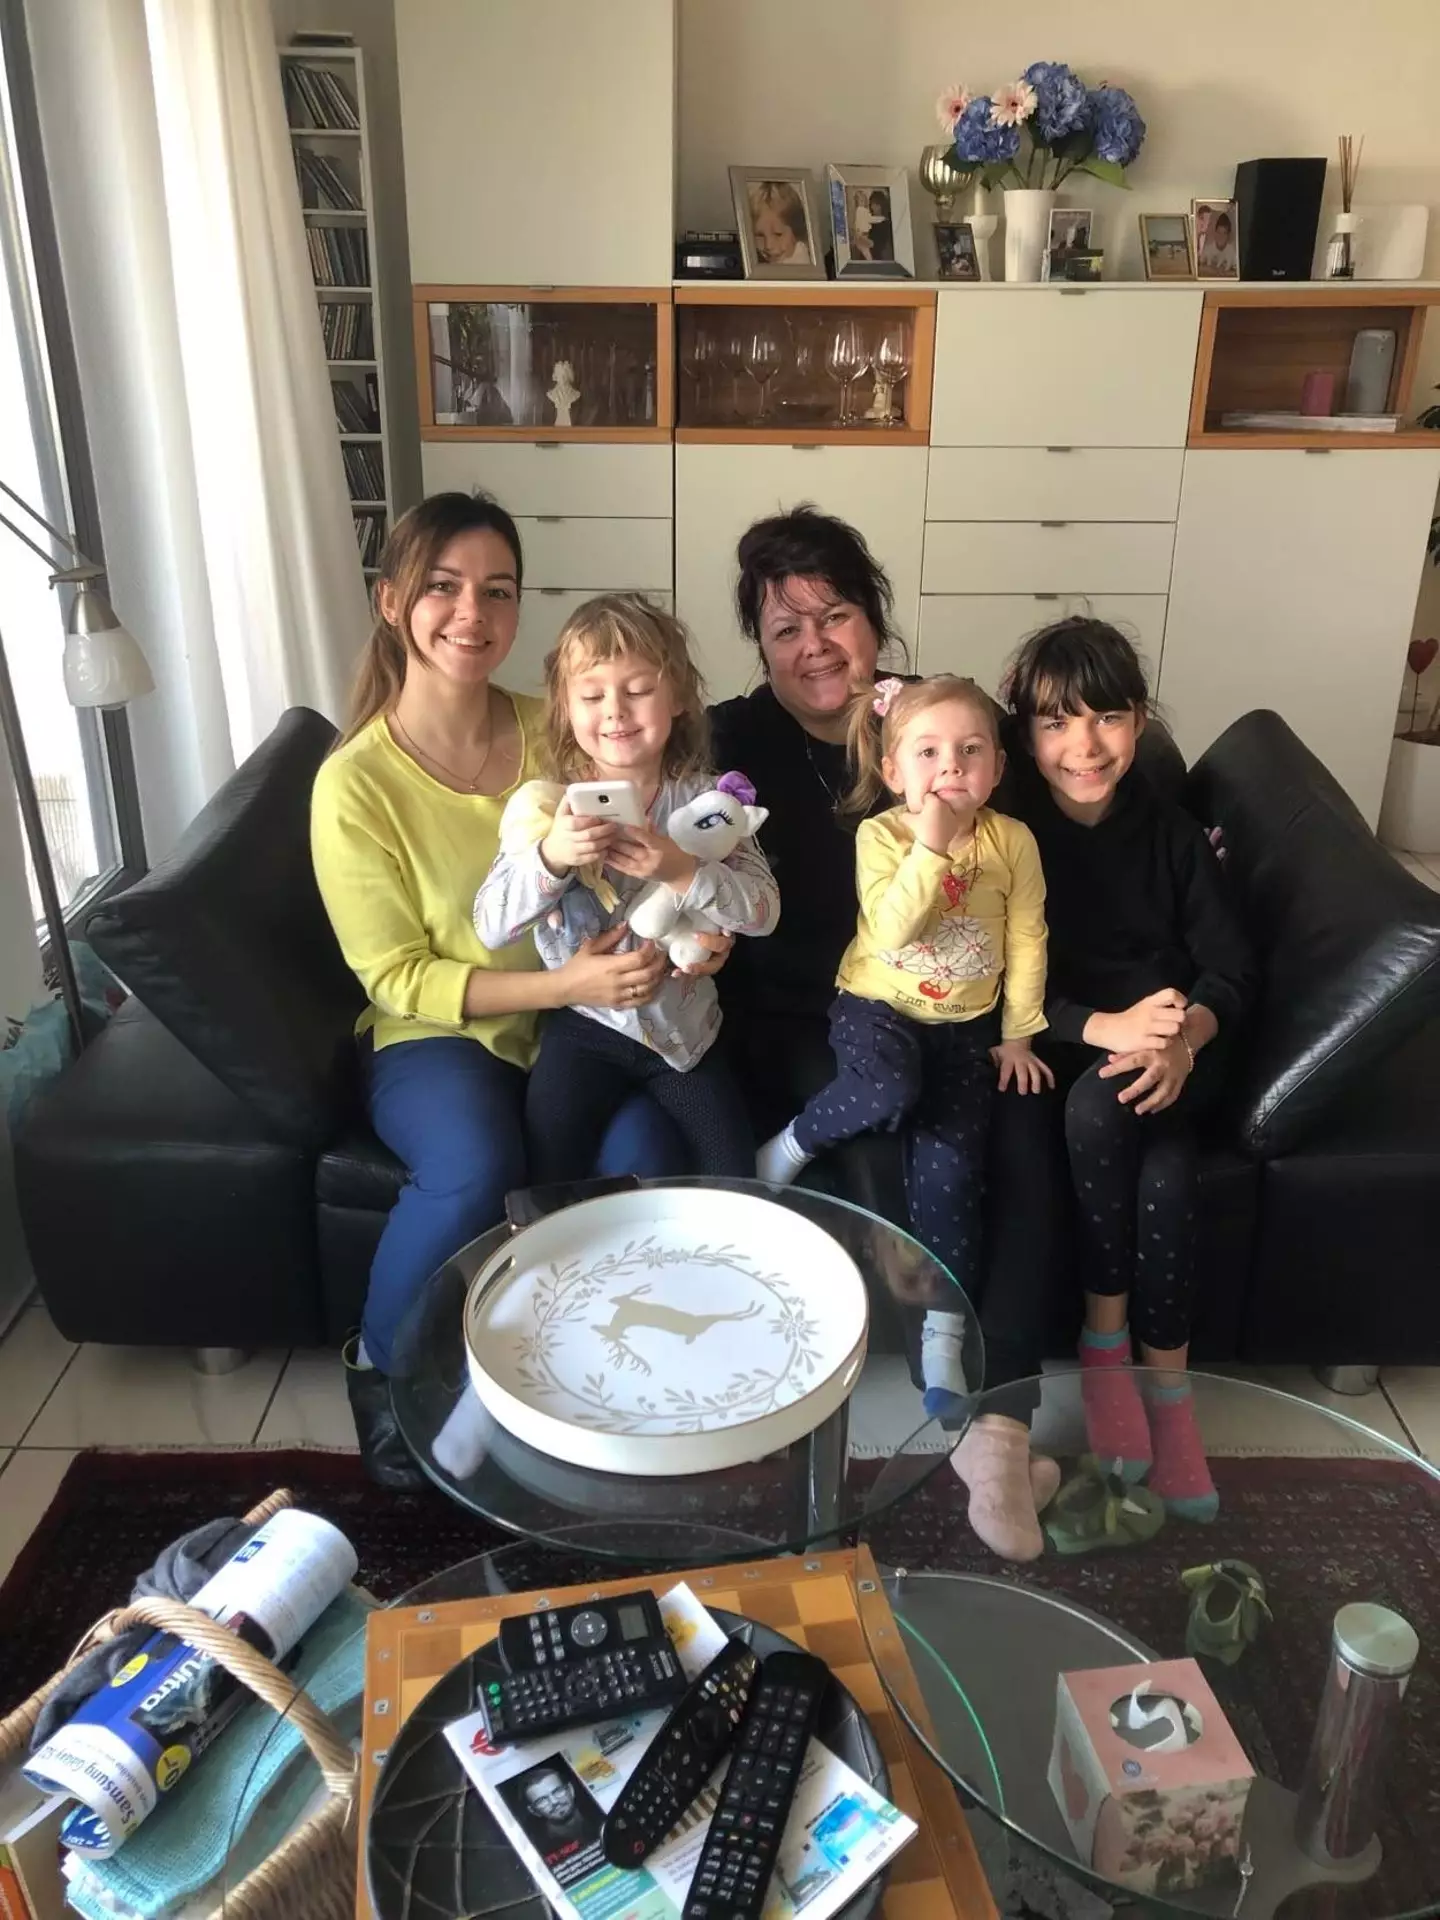 Julia and her family are now living in Germany.